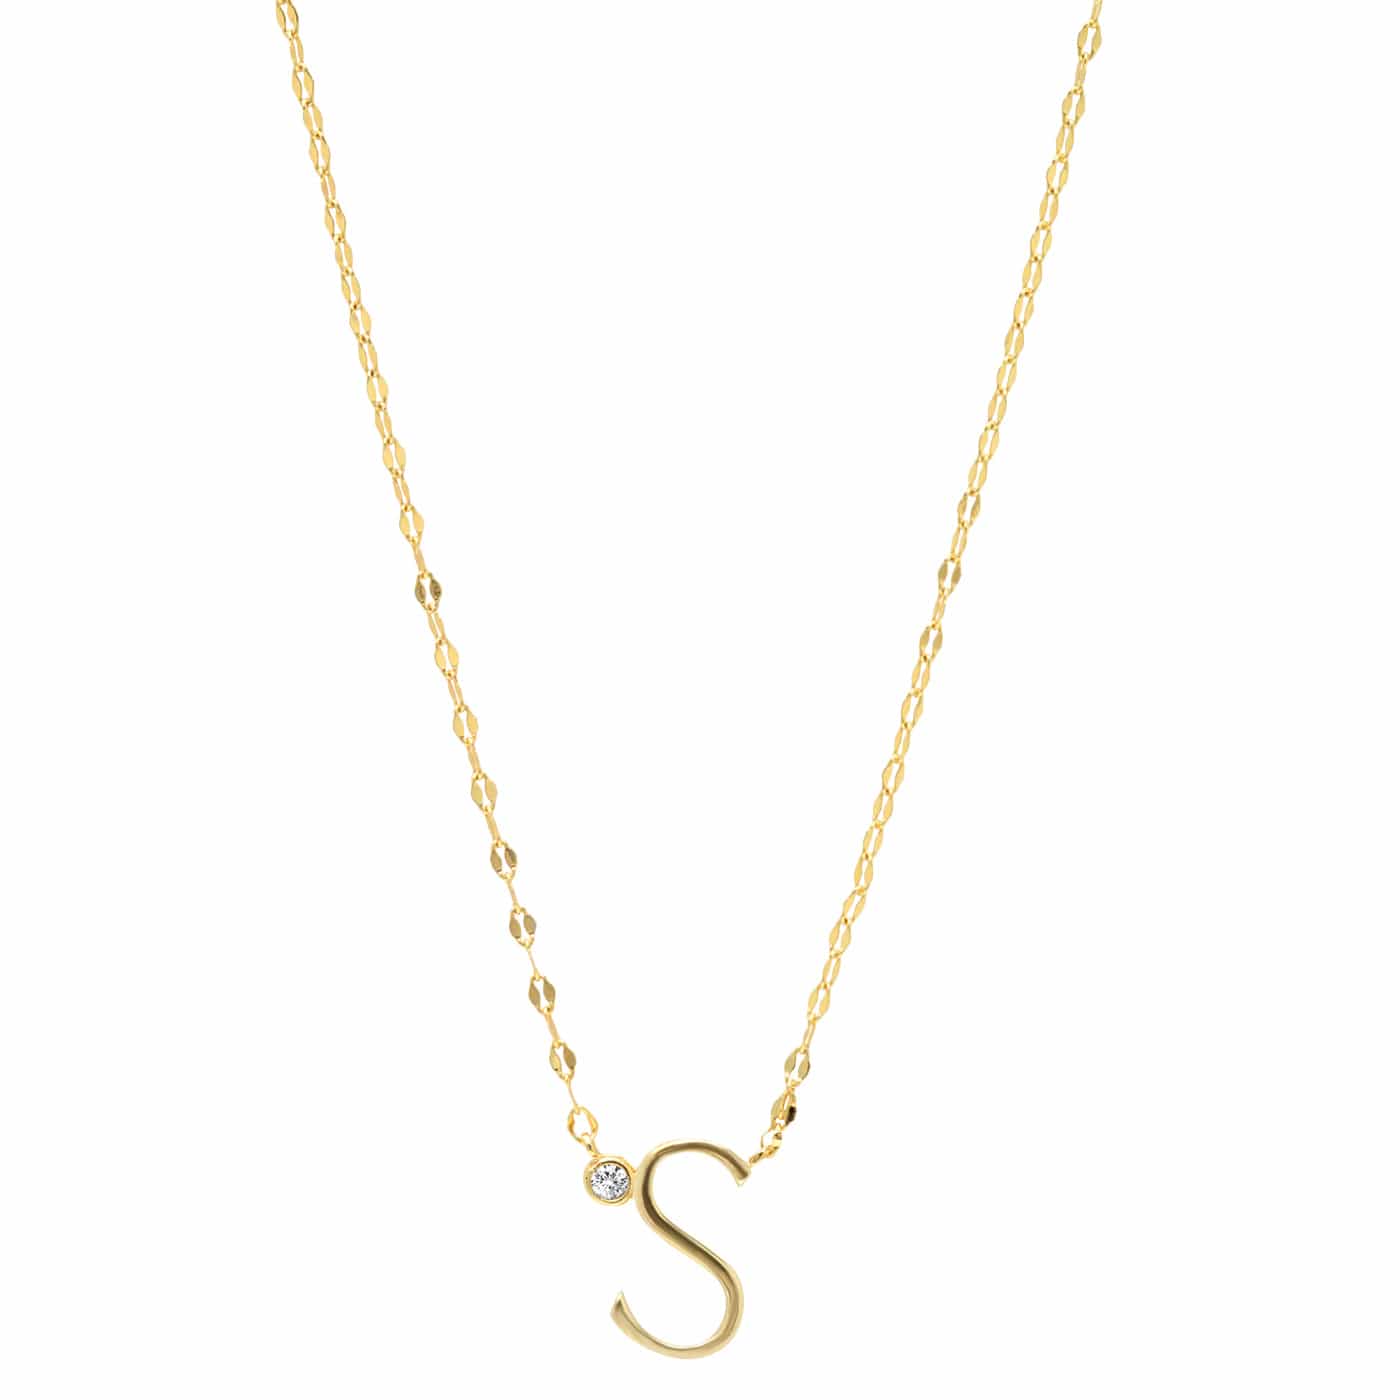 TAI JEWELRY Necklace S Medium Sized Initial Necklace With Cz Accent